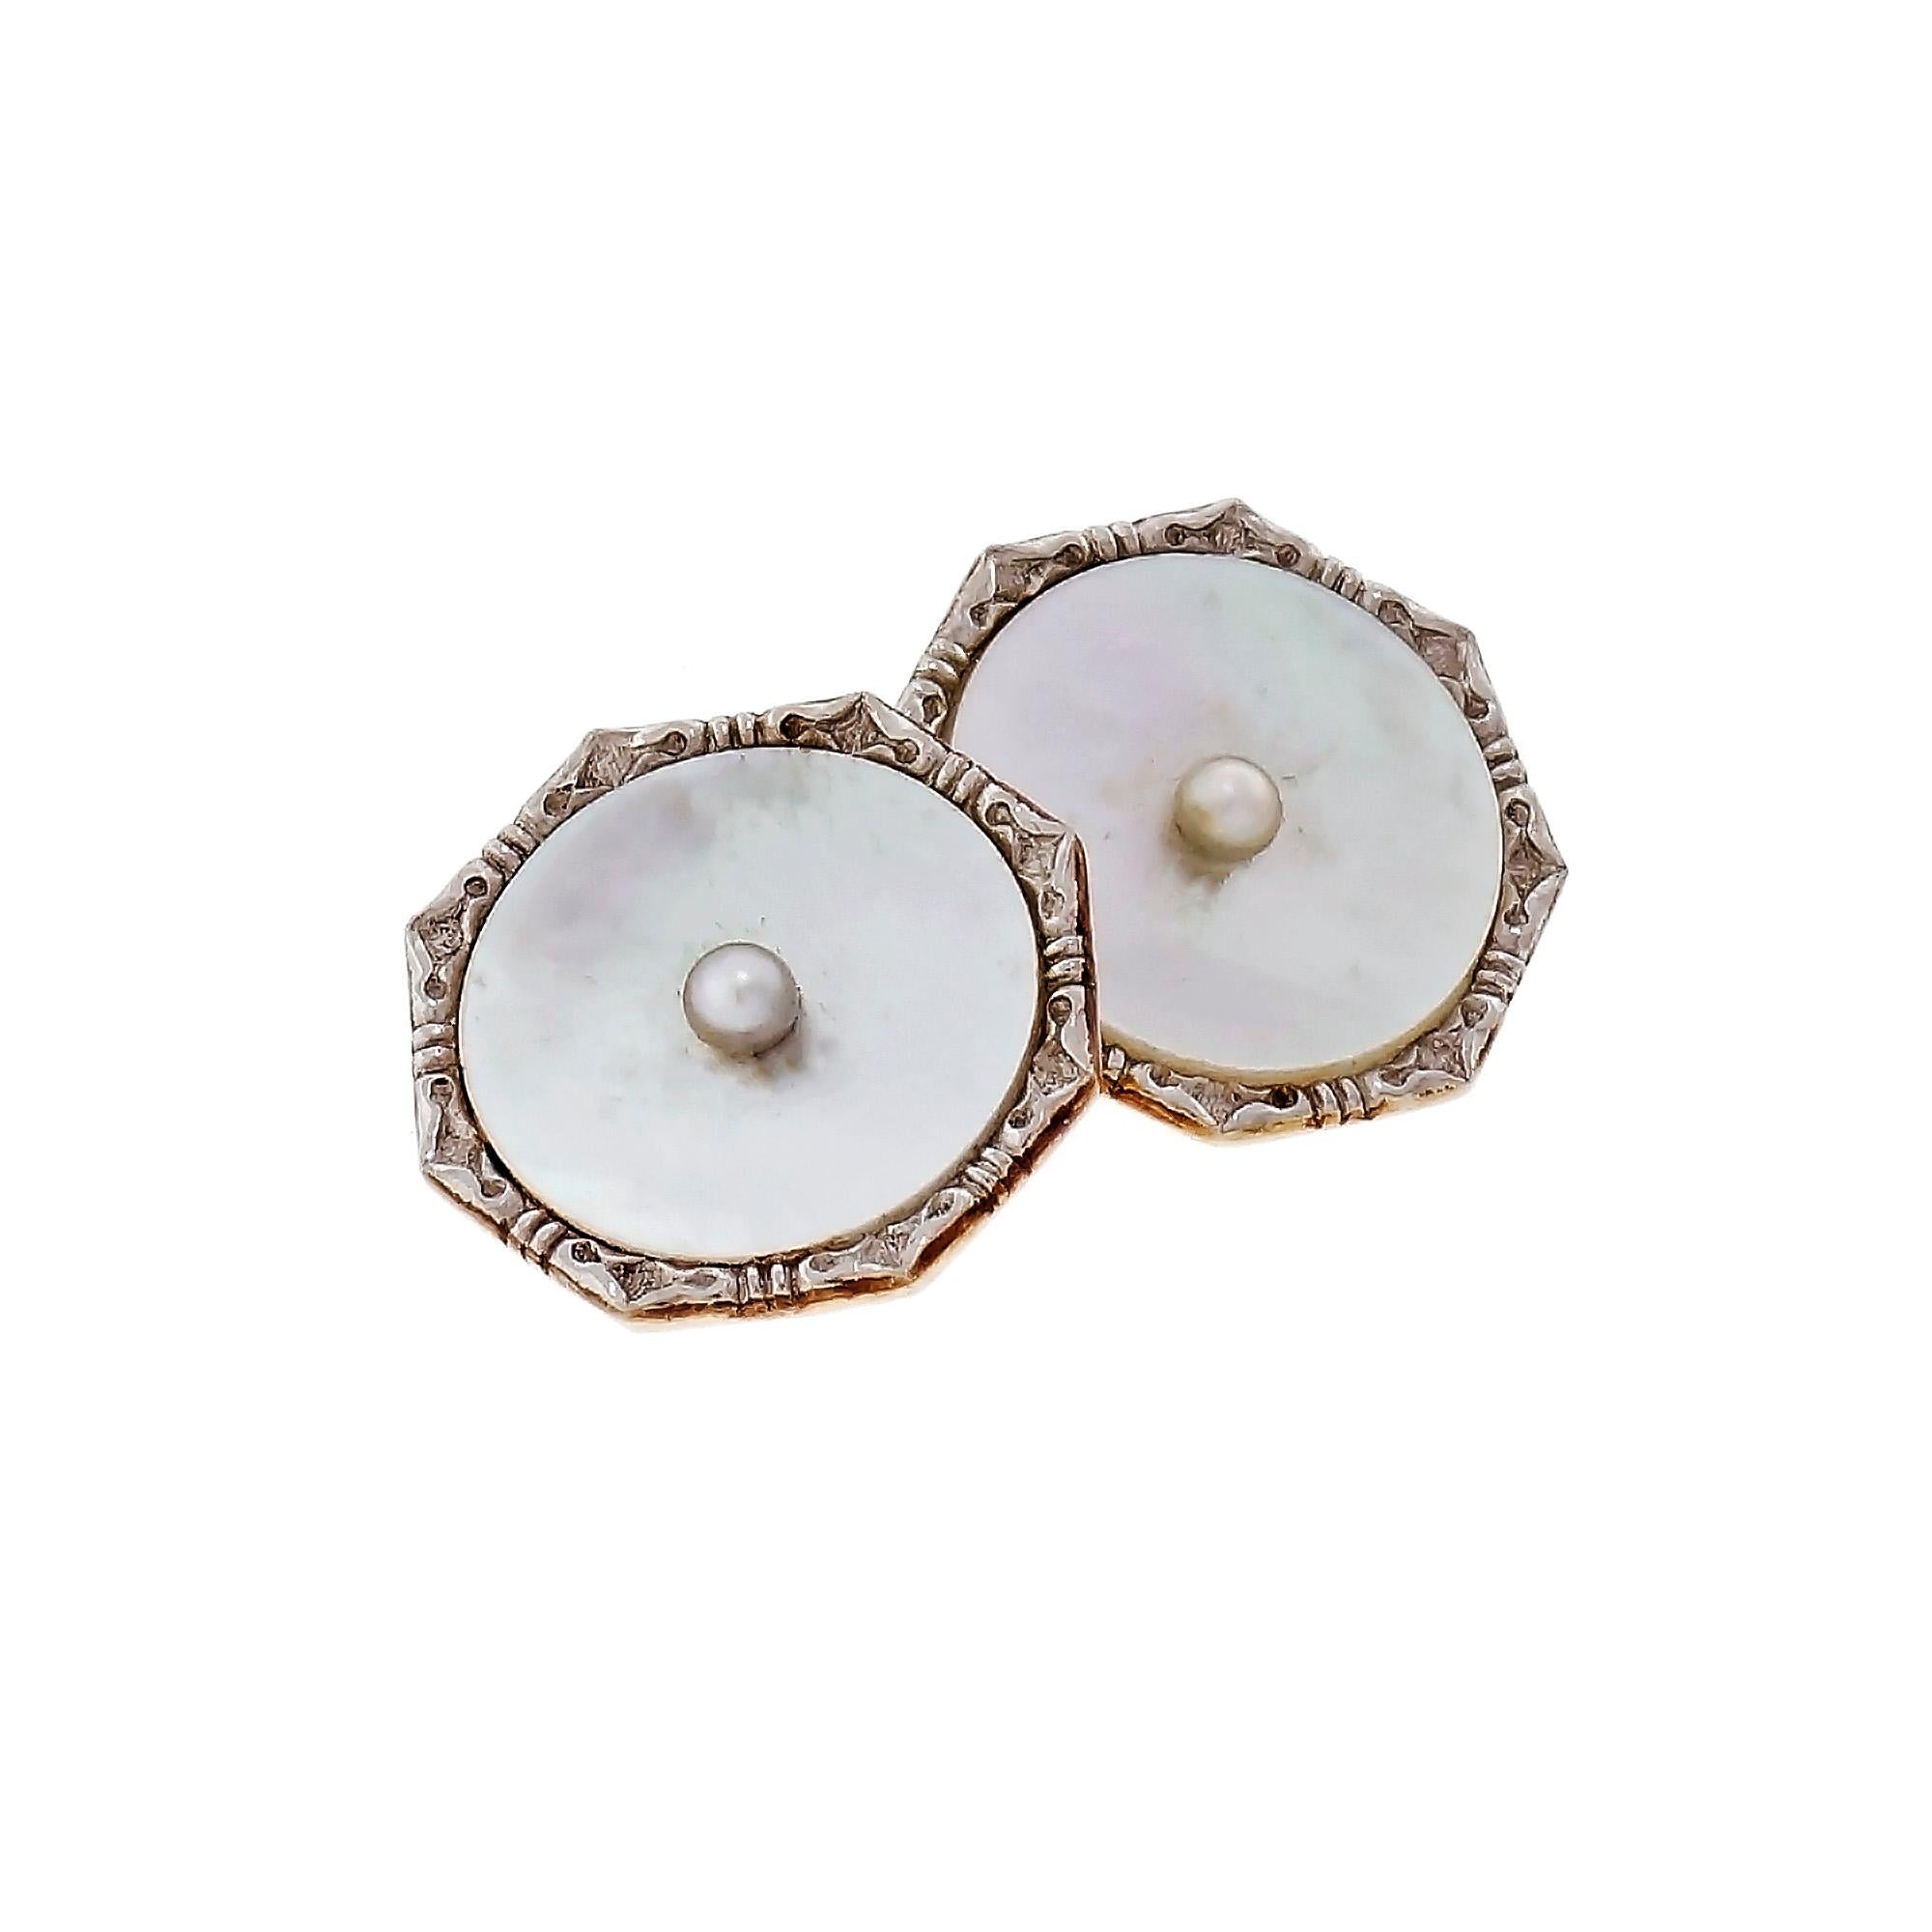 Larter & Sons full dress set, Includes 1 cufflinks, four buttons & 3 vest studs. Antique Larter & Sons 14k Mother of Pearl Victorian period full dress 14k yellow gold set with Platinum tops.

10 natural white Pearls, 2mm 
10 Mother of Pearl discs